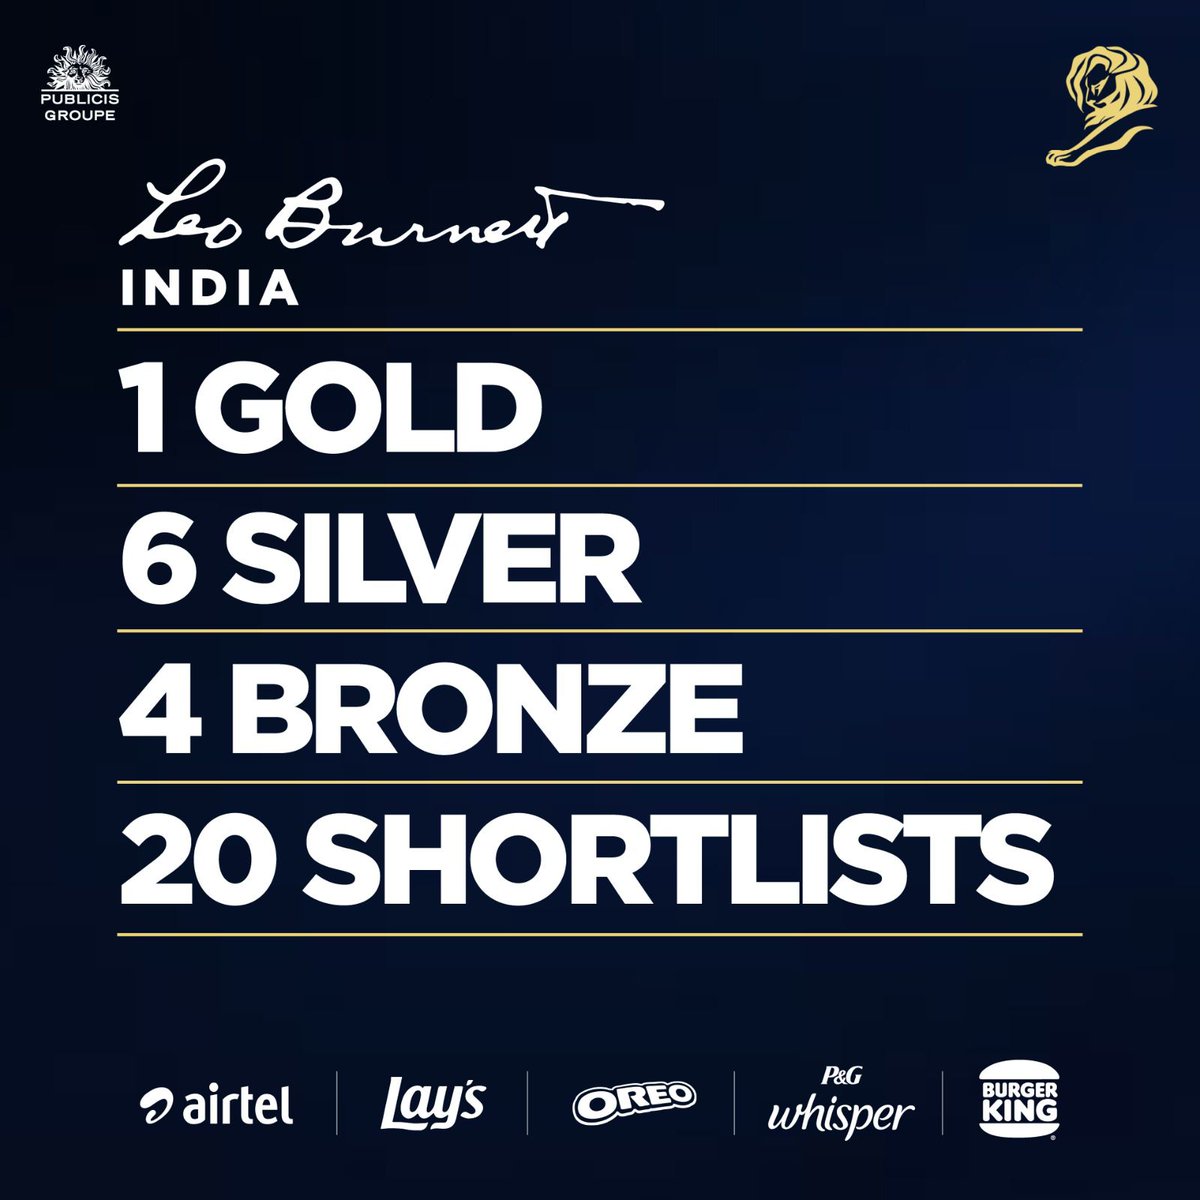 And it’s a wrap at Cannes Lions! 11 Lions across multiple categories awarded for work across 4 of our biggest brands – Airtel, PepsiCo - Lays, Mondelez - Oreo, and P&G Whisper. What a journey it has been as we pave our way to becoming India’s No. 1 new-age agency.